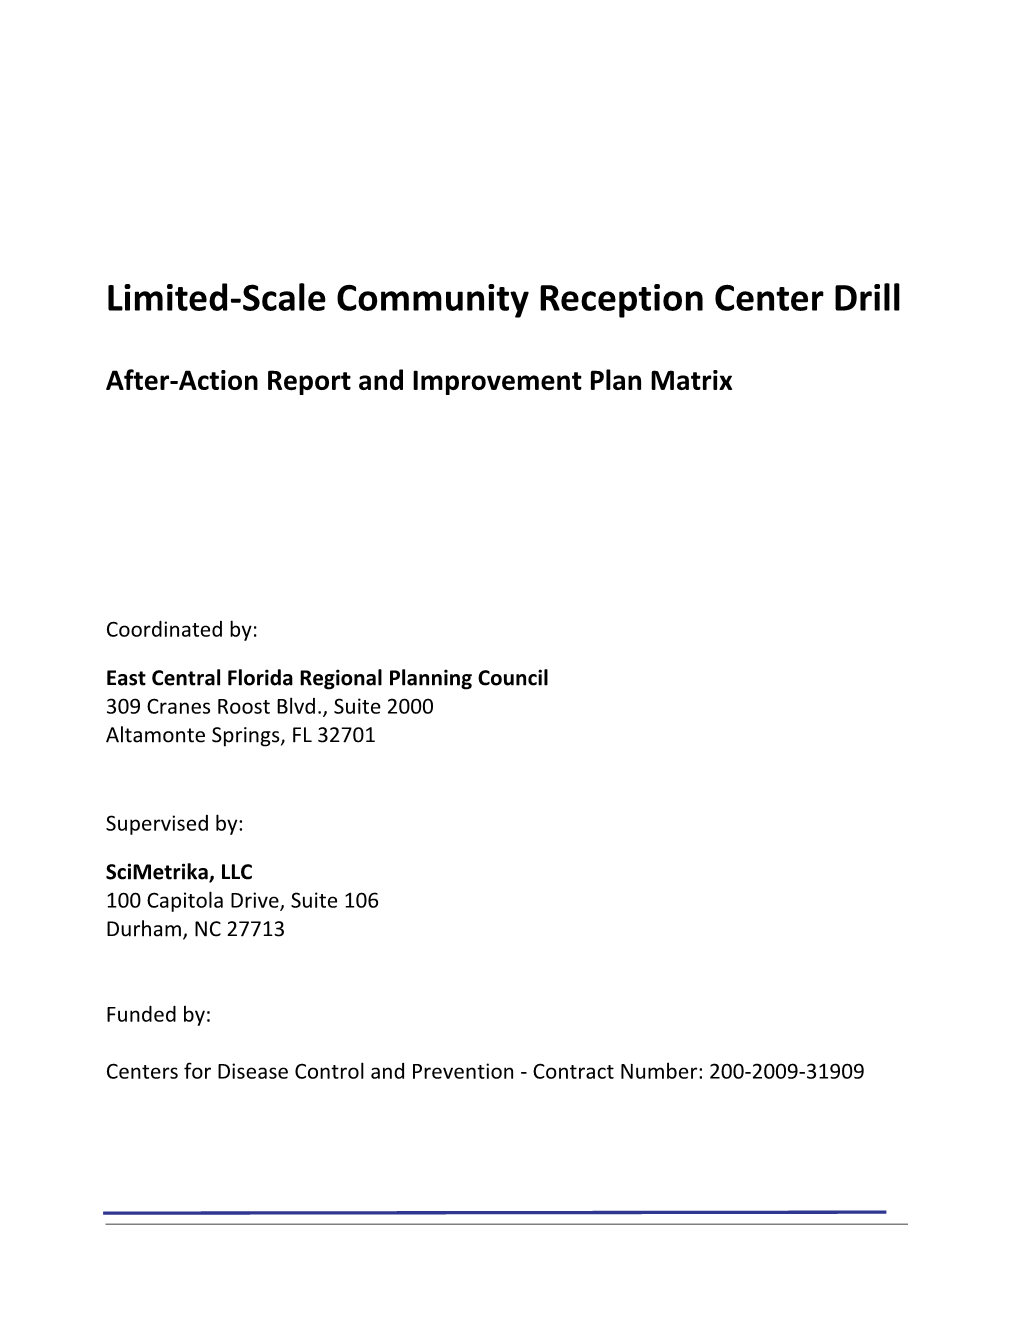 After-Action Report / Improvement Plan East Central Florida Regional Planning Council